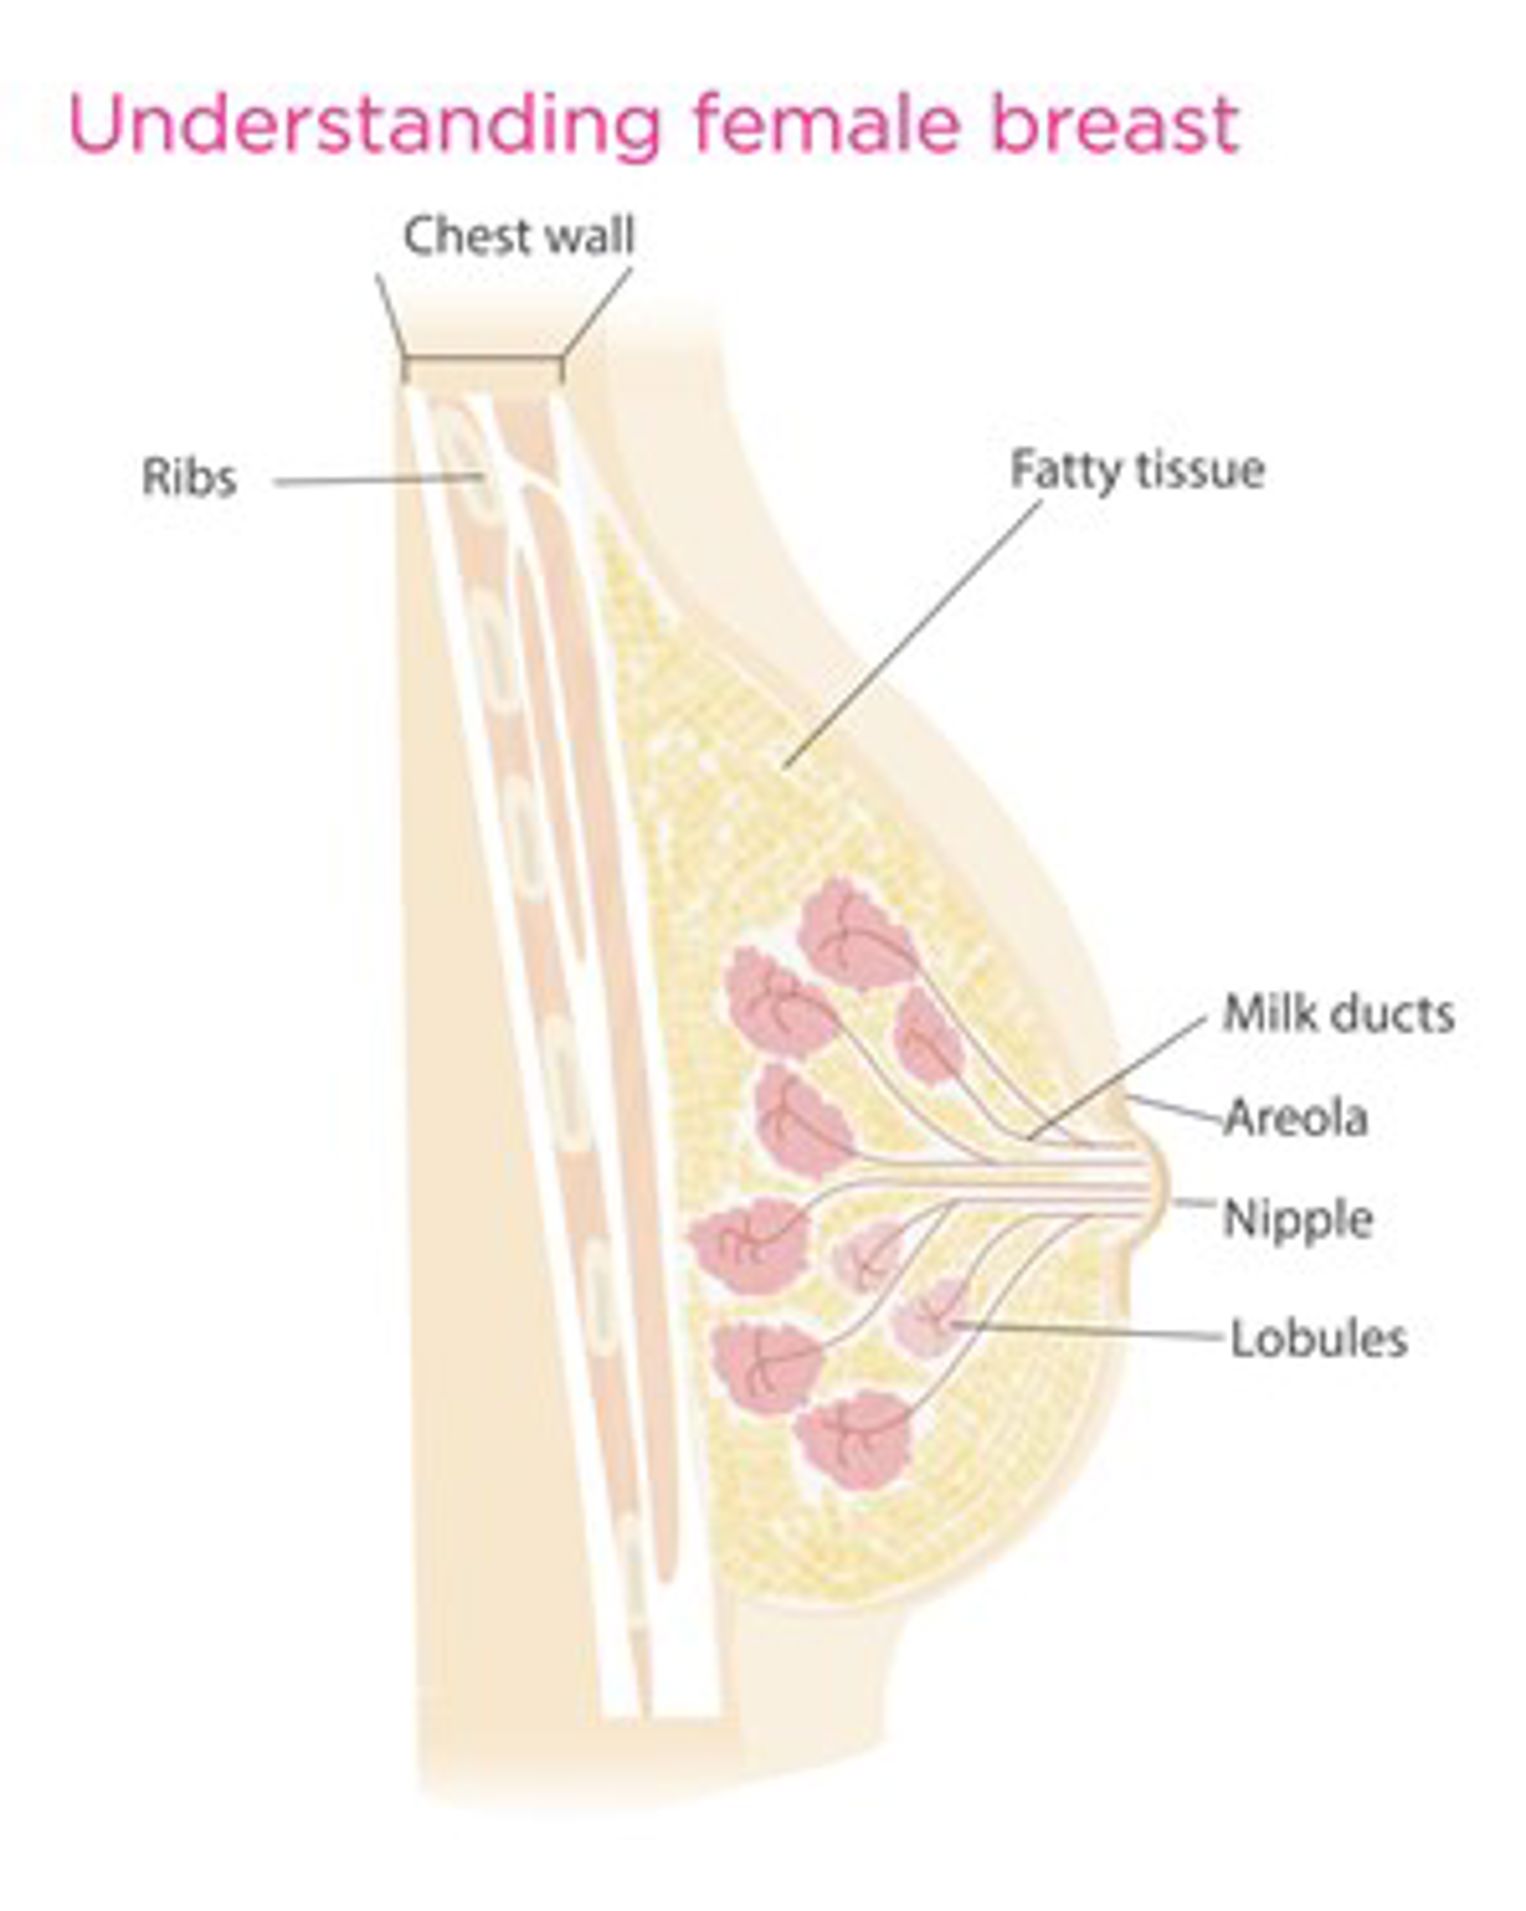 Diagram of a female breast, showing the location of the tissue, sacs and lobules